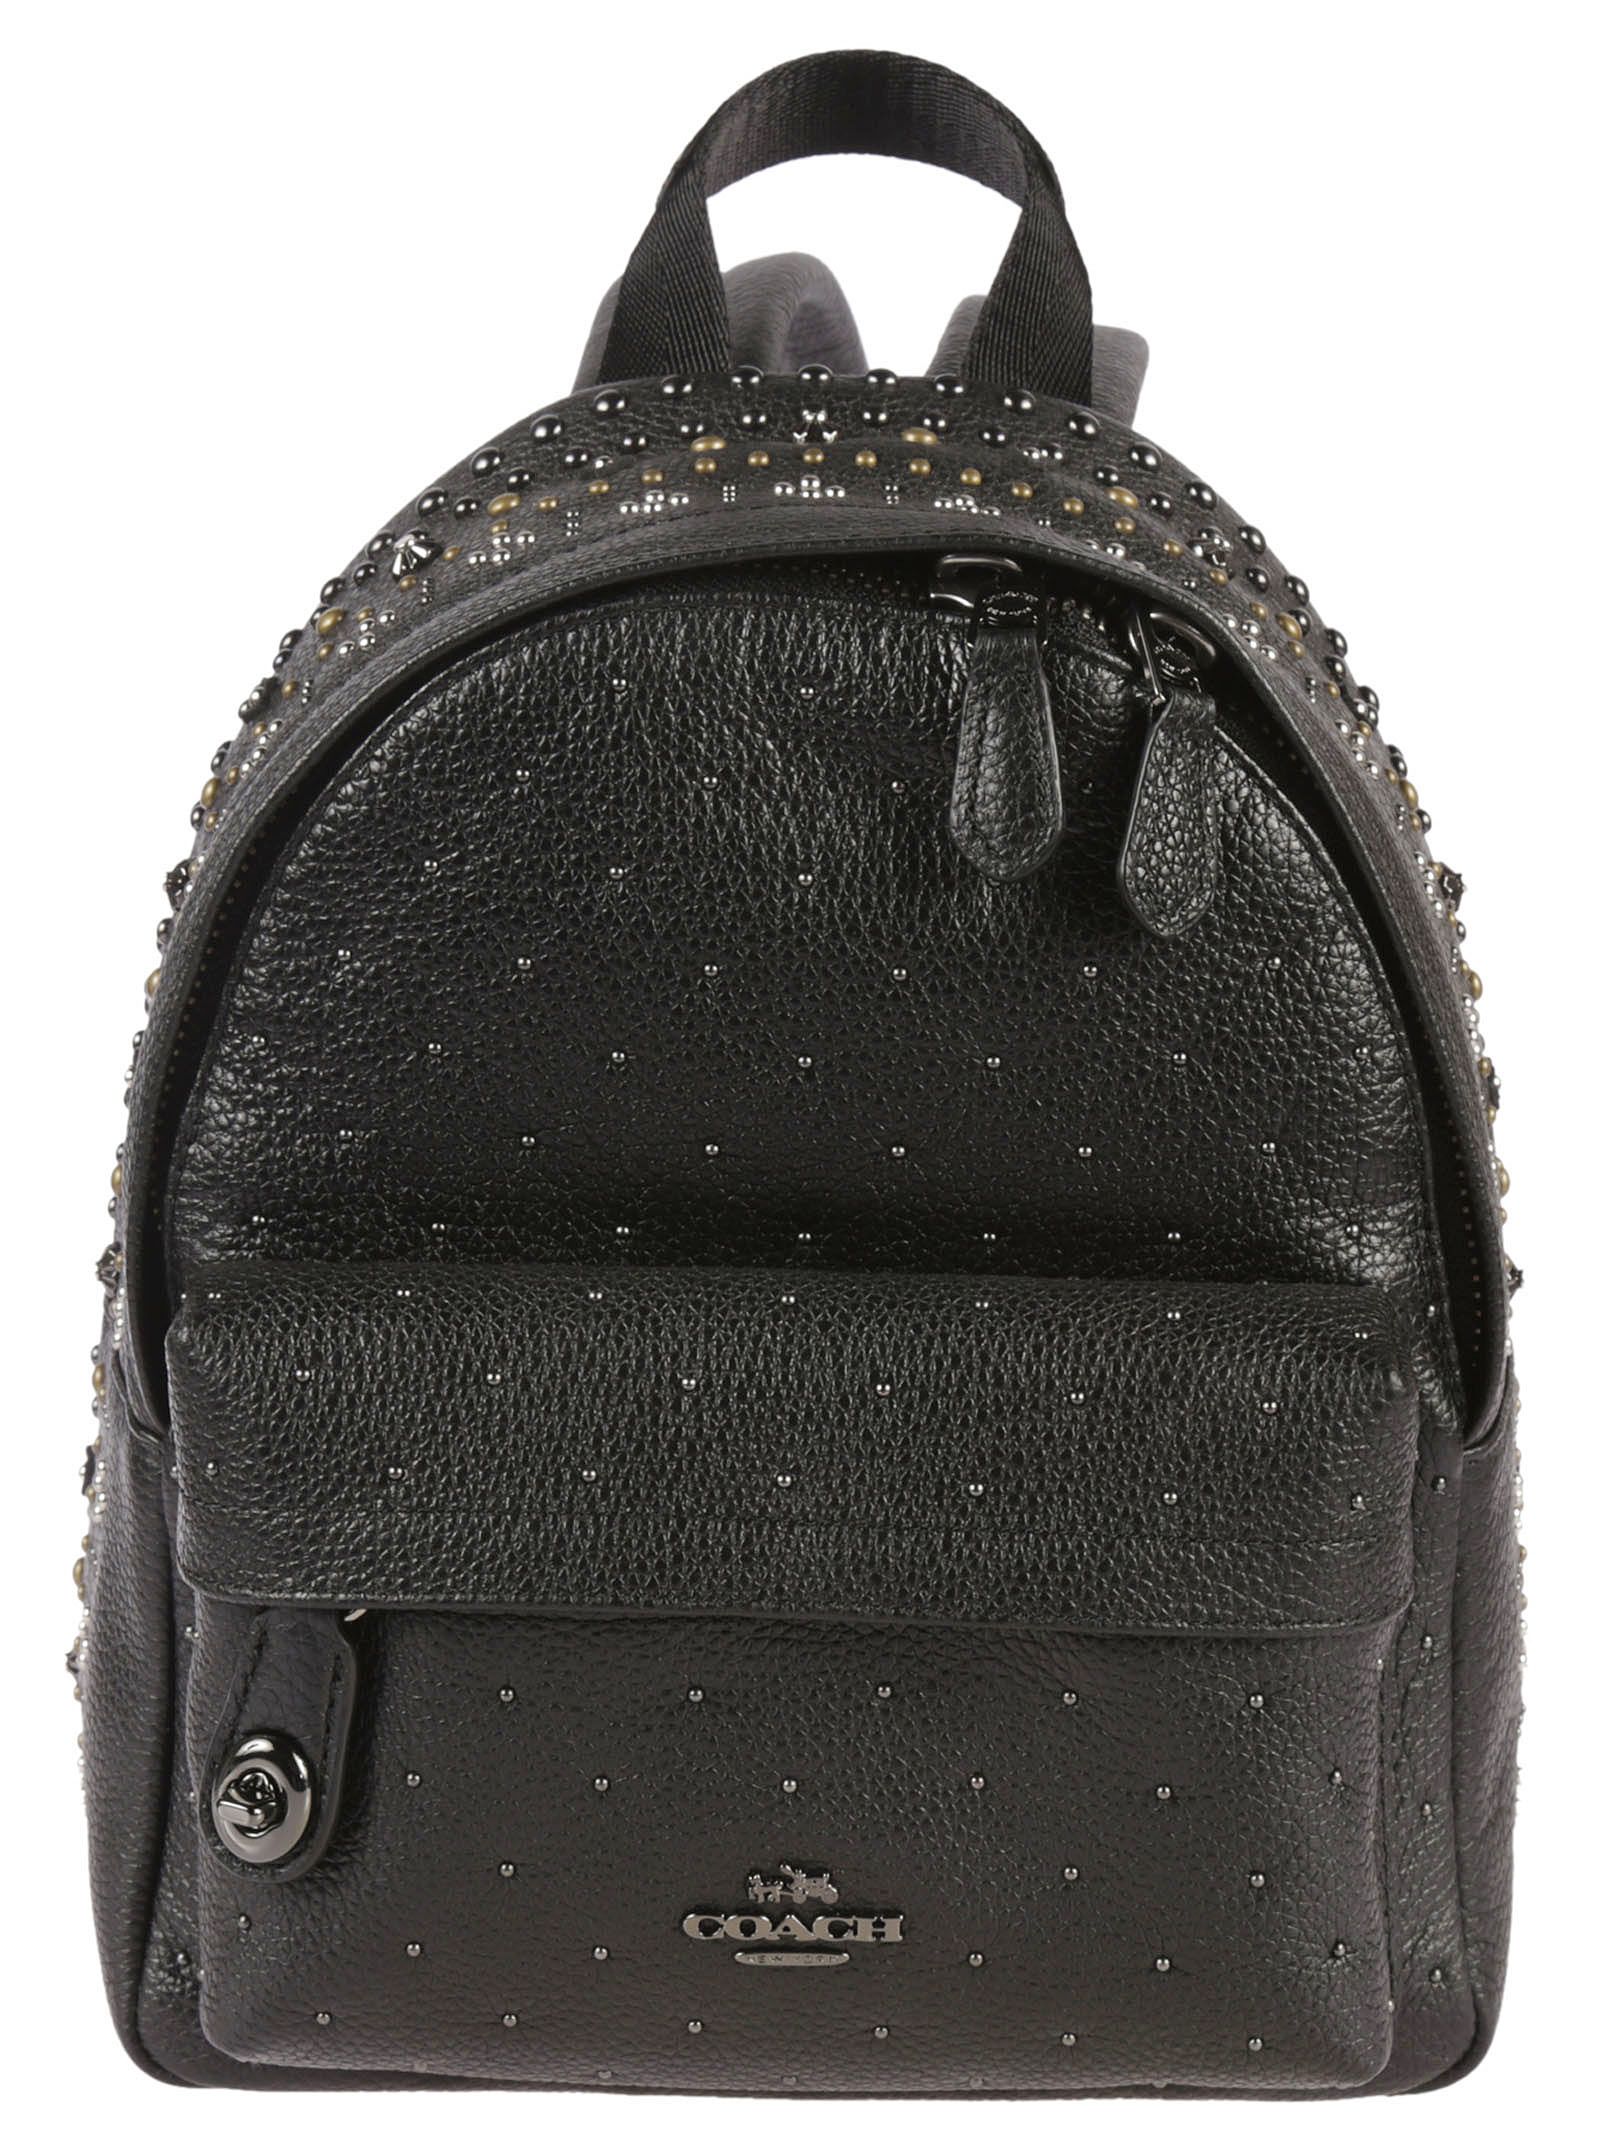 italist Best price in the market for Coach Coach Mini Studded